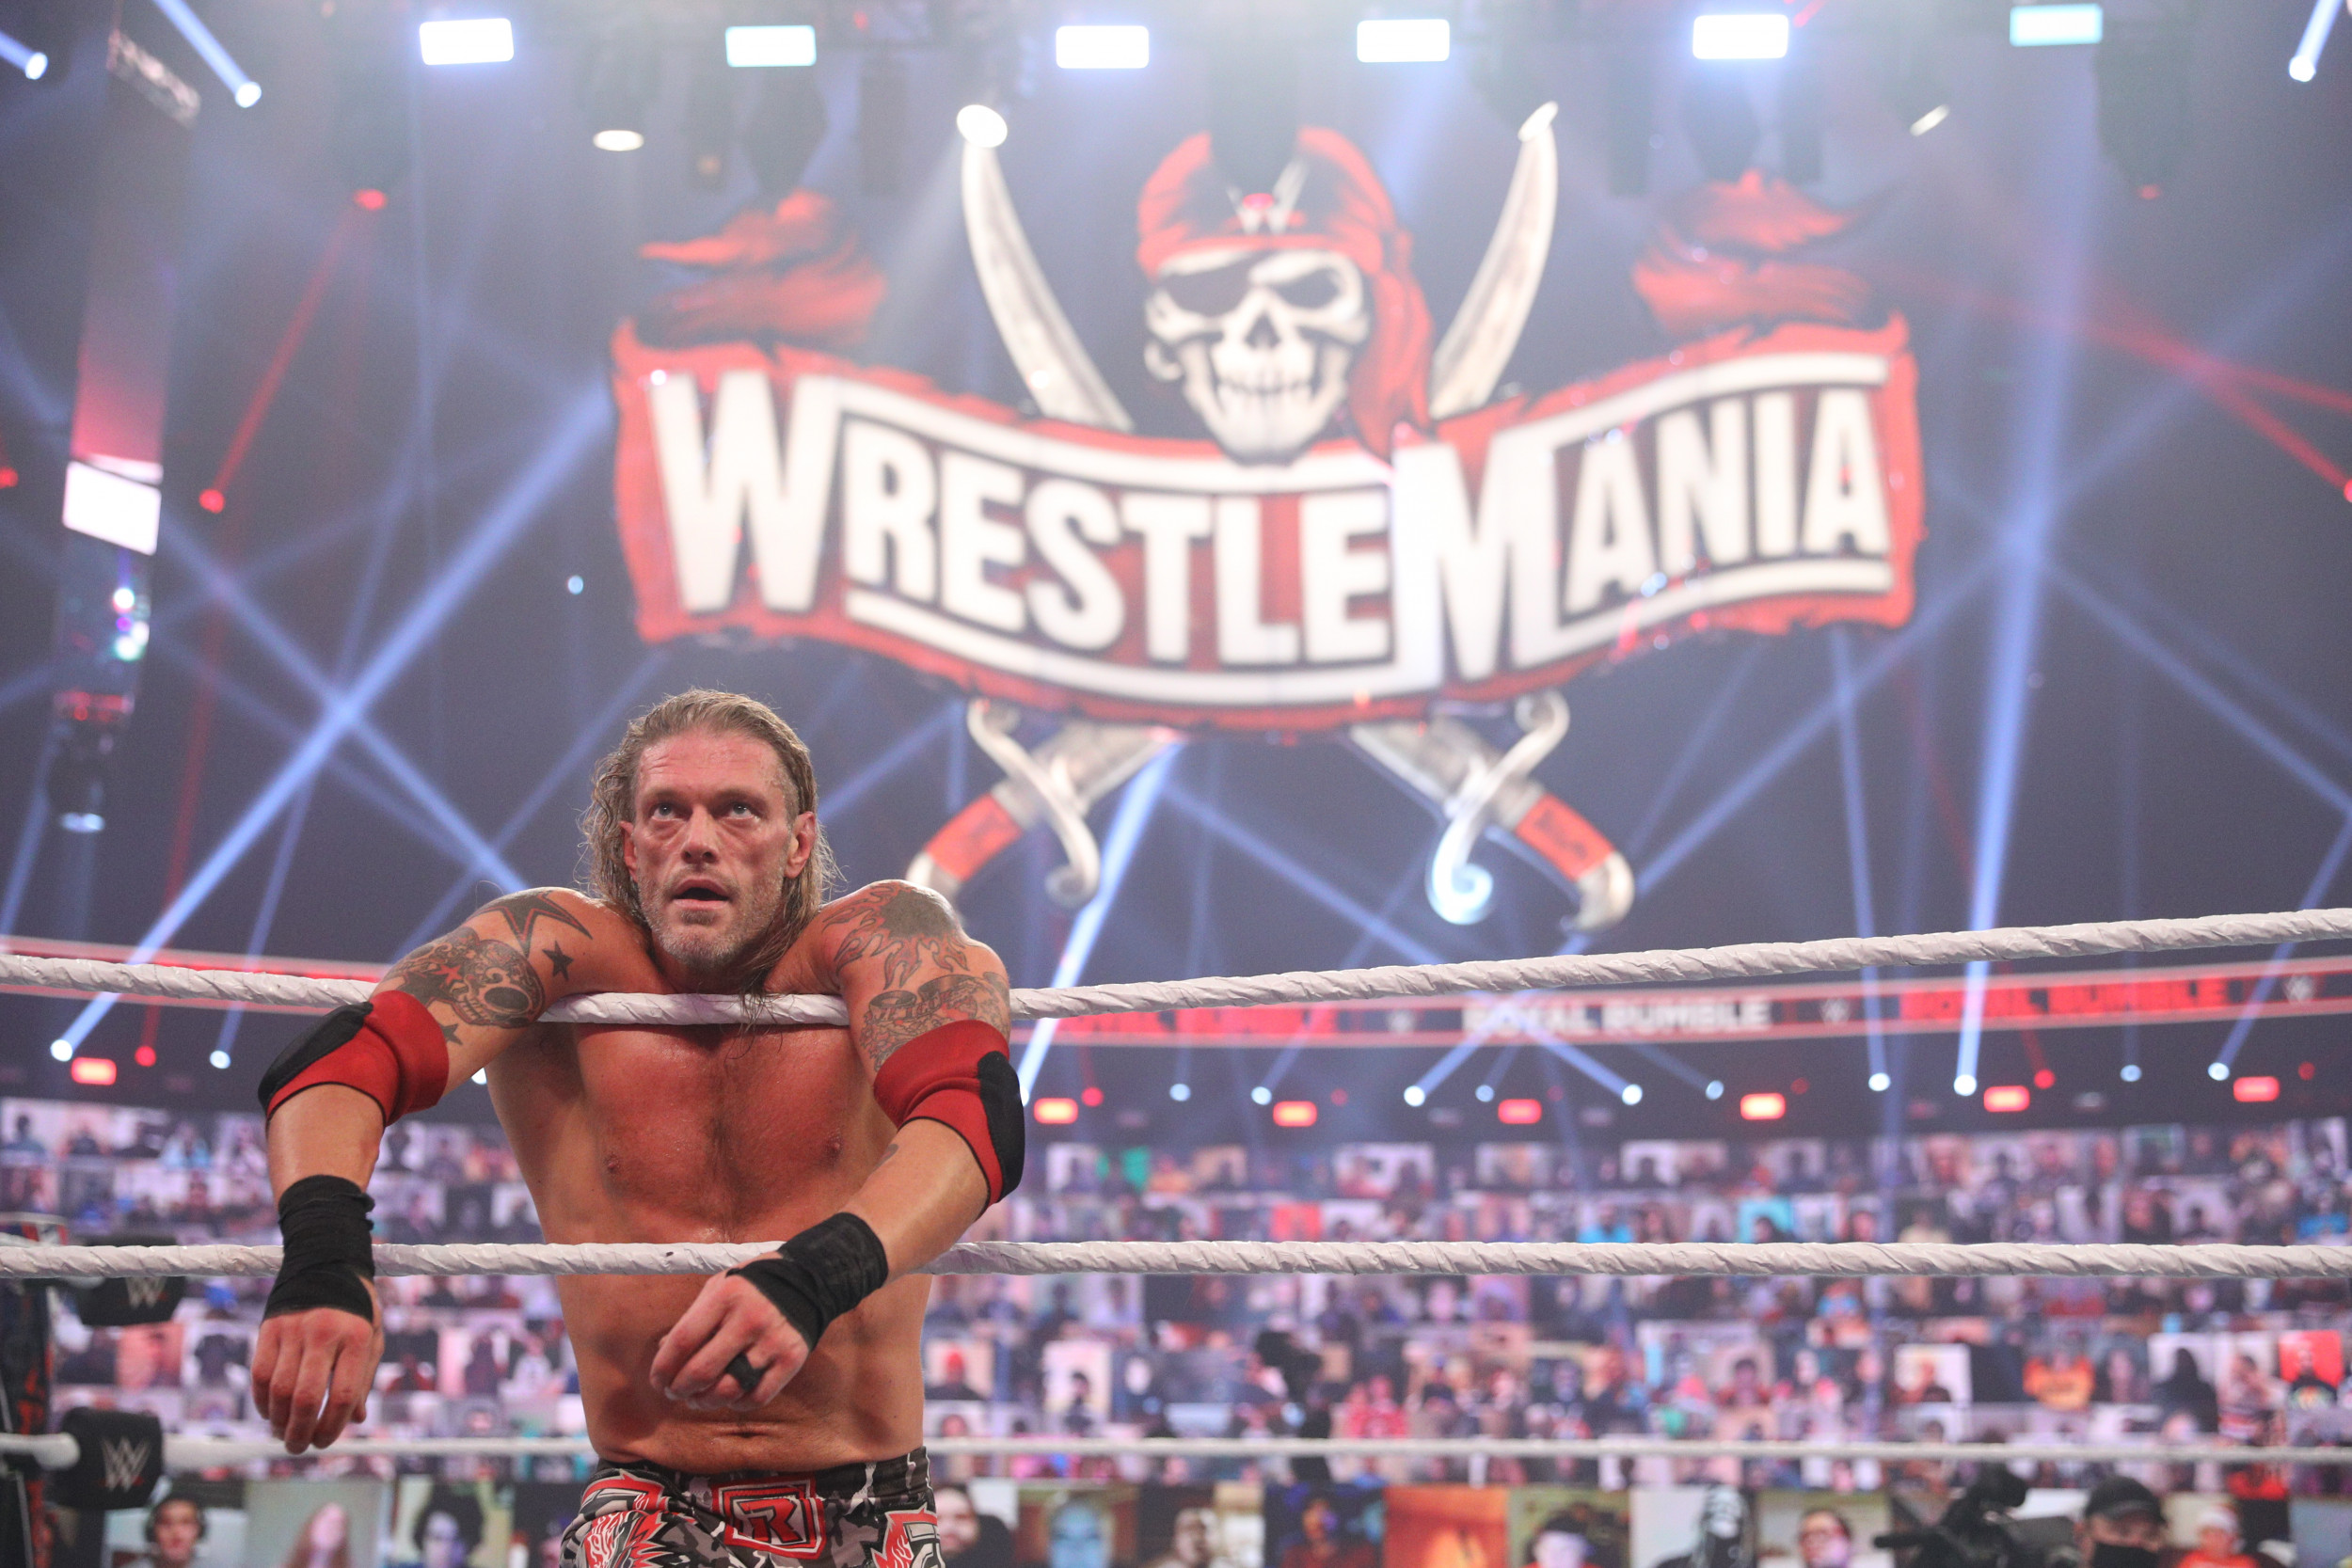 WrestleMania 37 10 Years After Retirement, Edge Returns and Resurrects